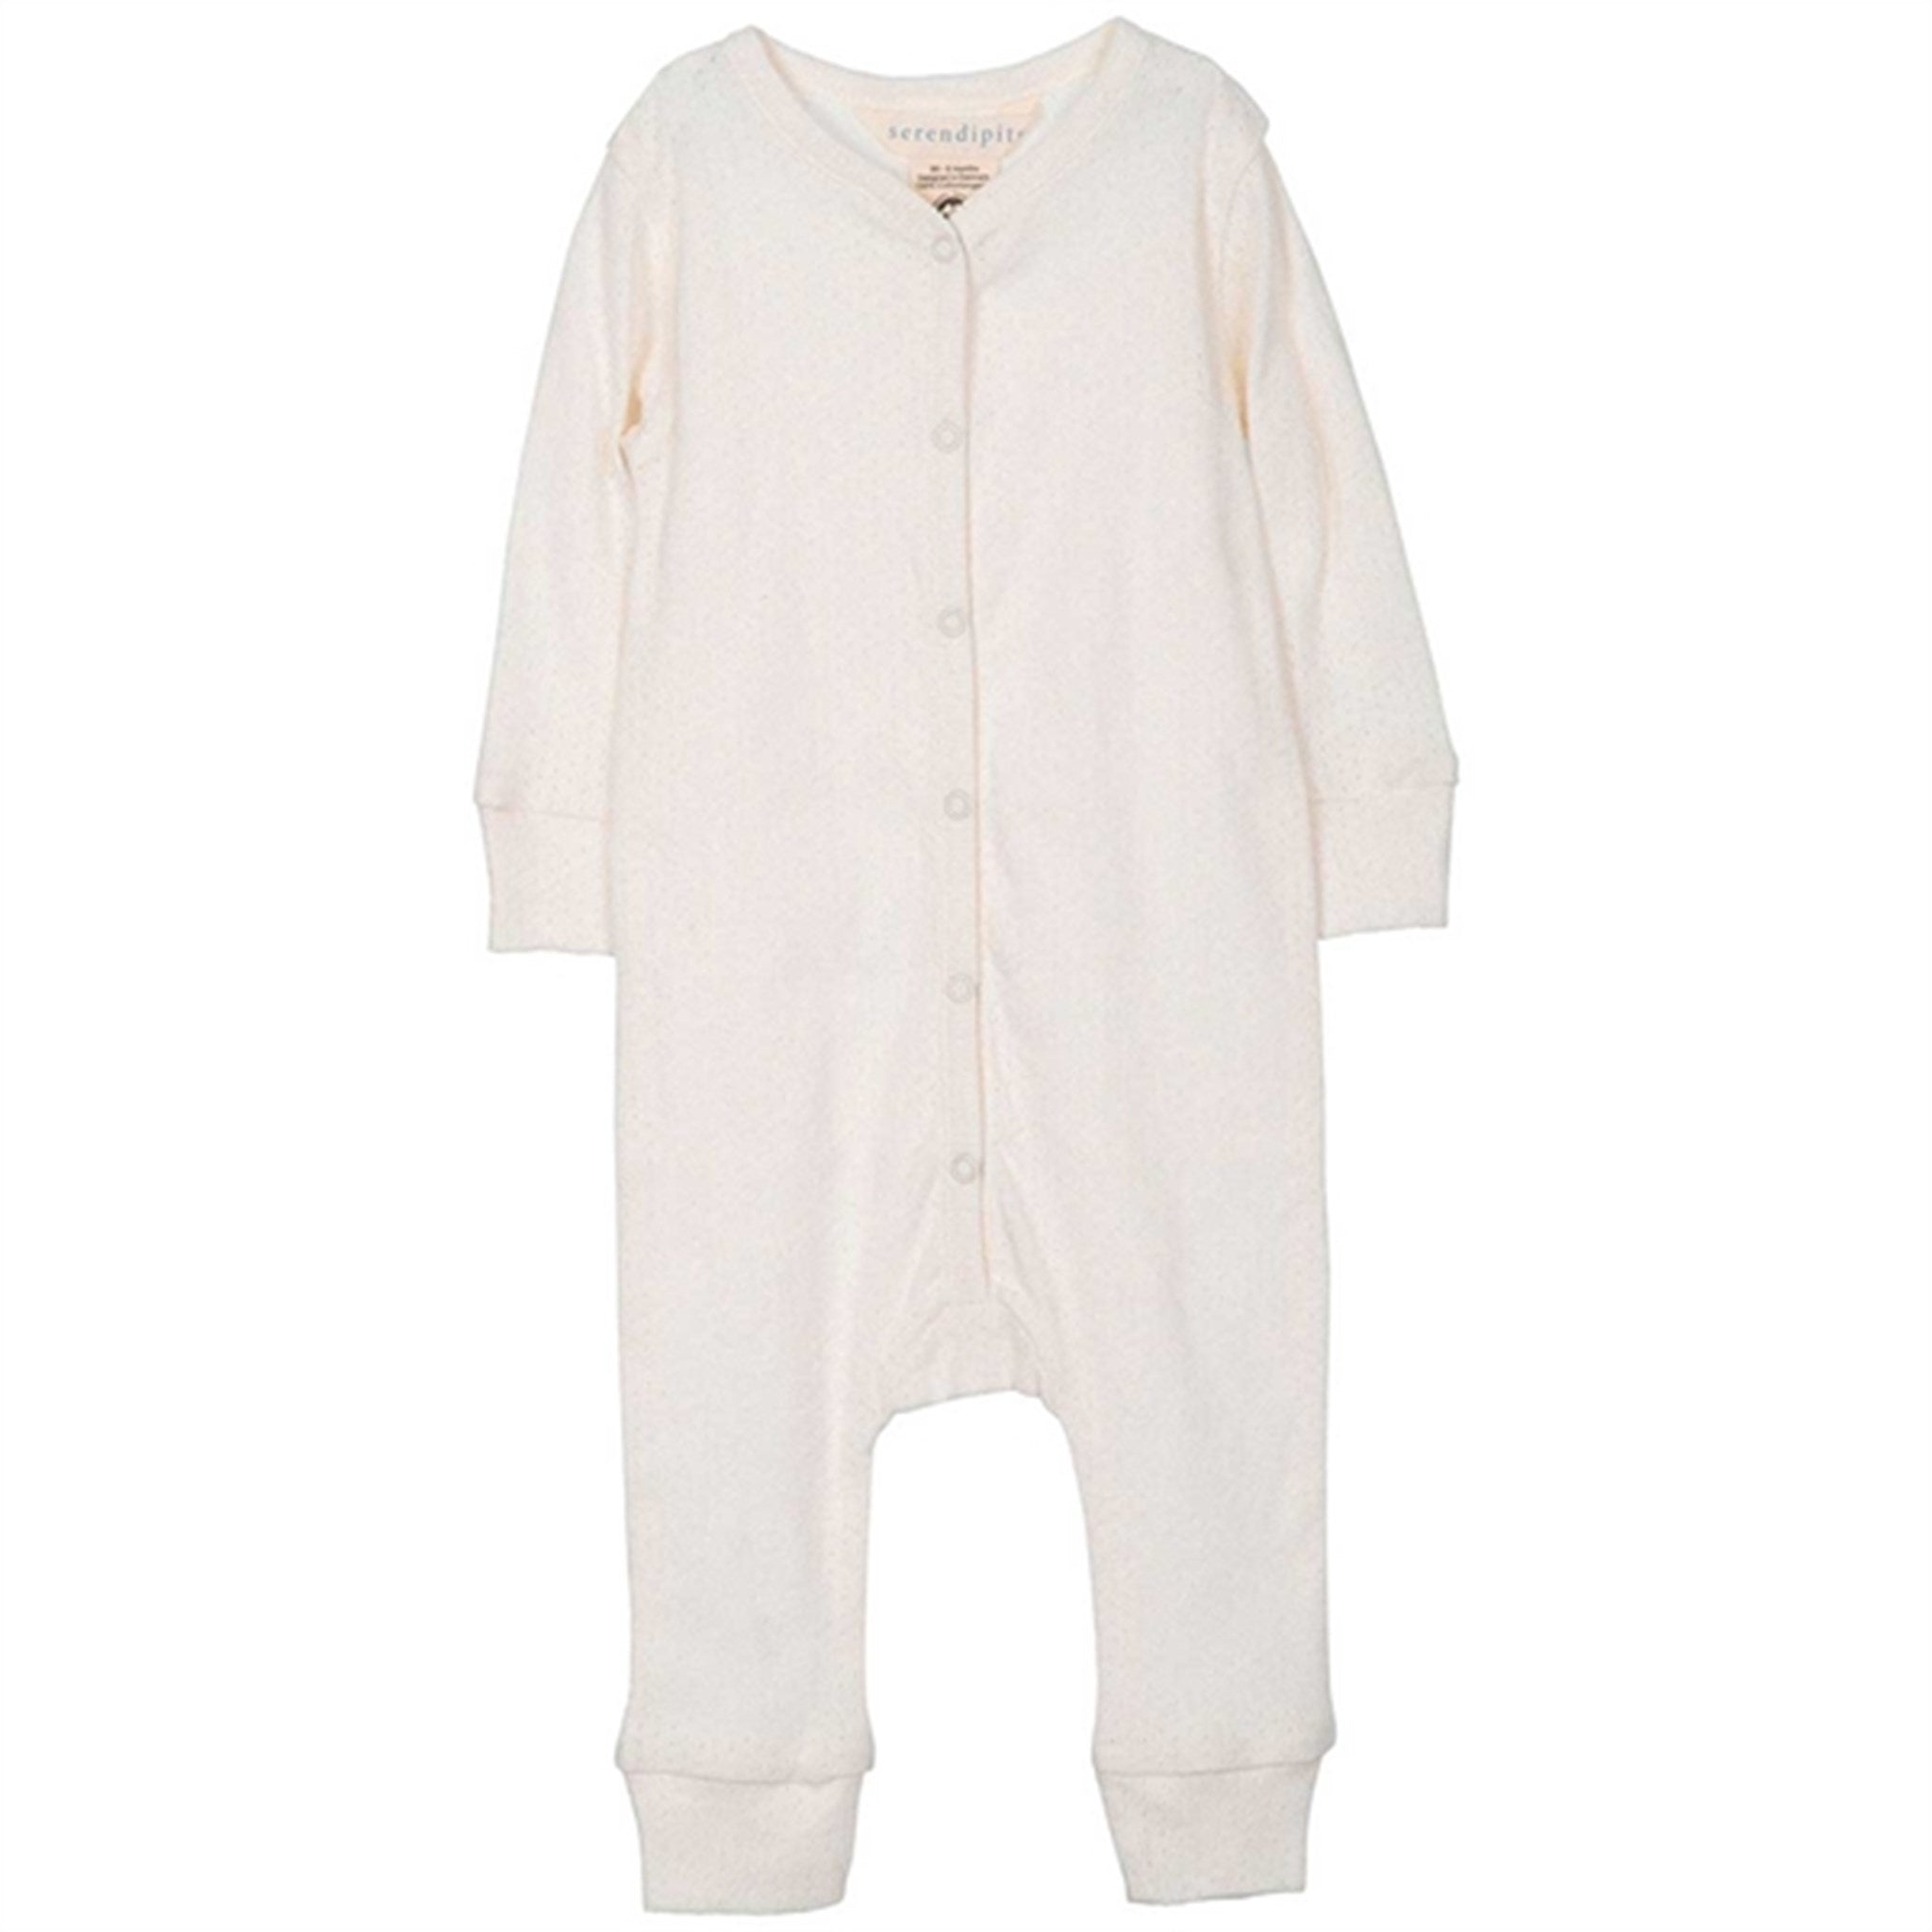 Serendipity Offwhite/Pointelle Rib Baby Suit